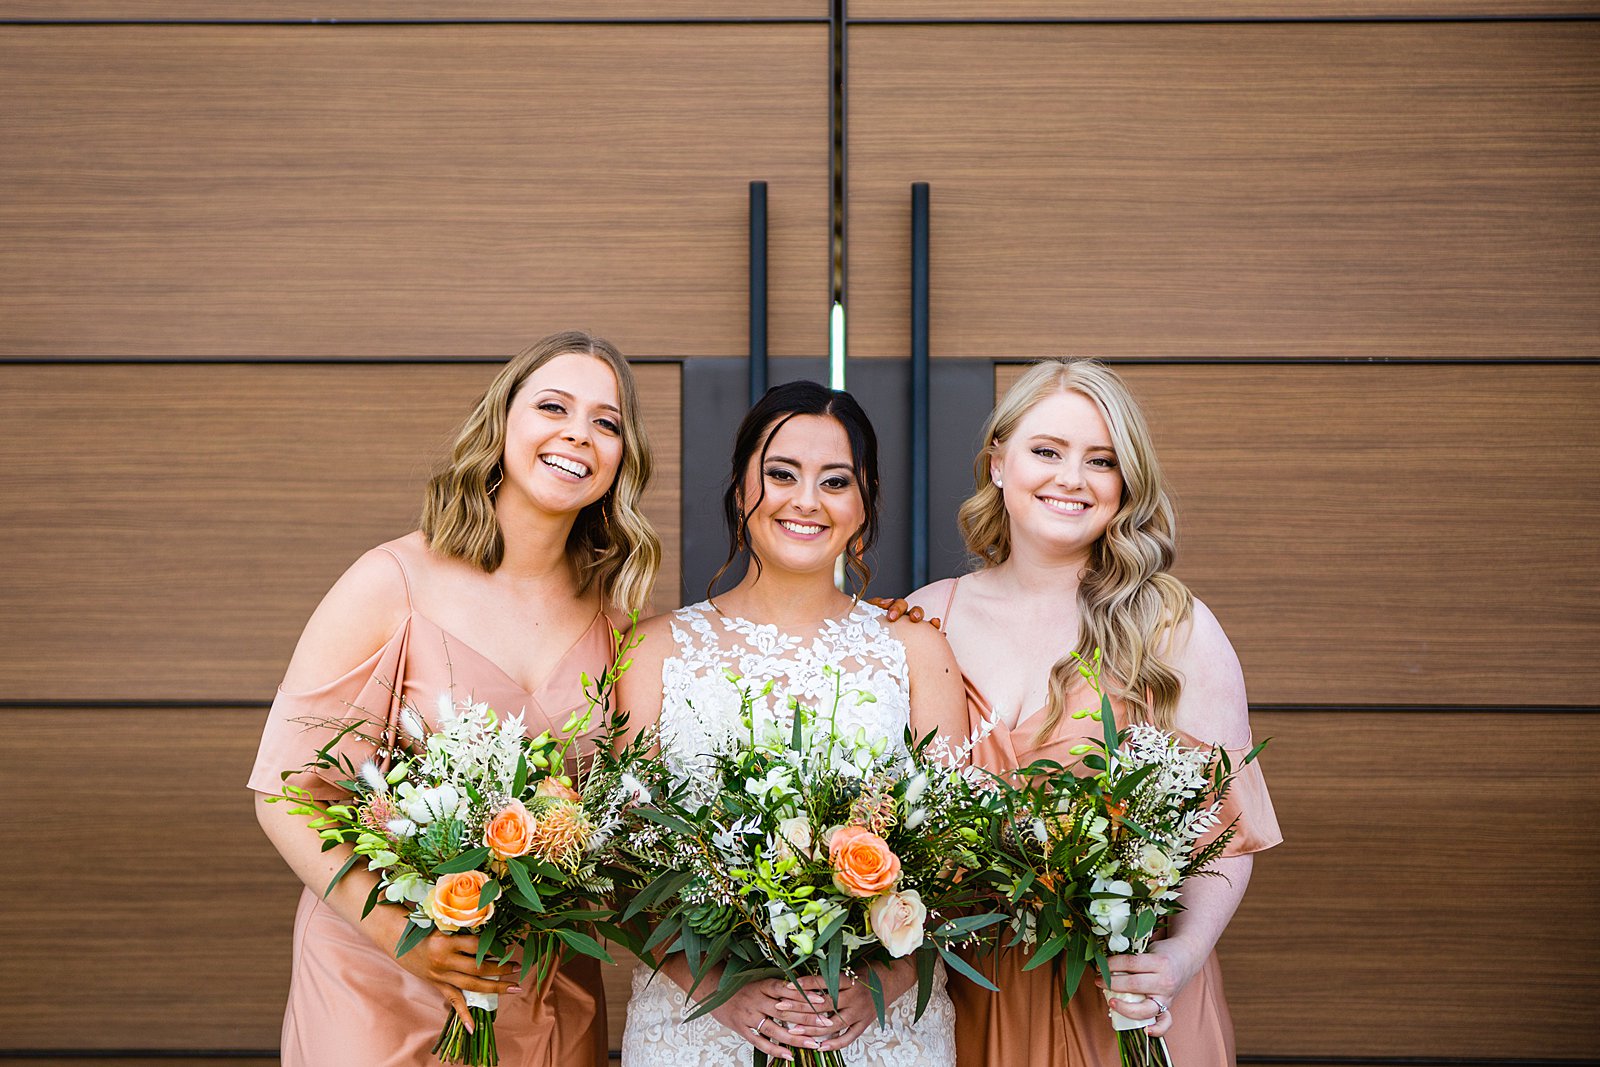 Bride and bridesmaids together at a The Paseo wedding by Arizona wedding photographer PMA Photography.